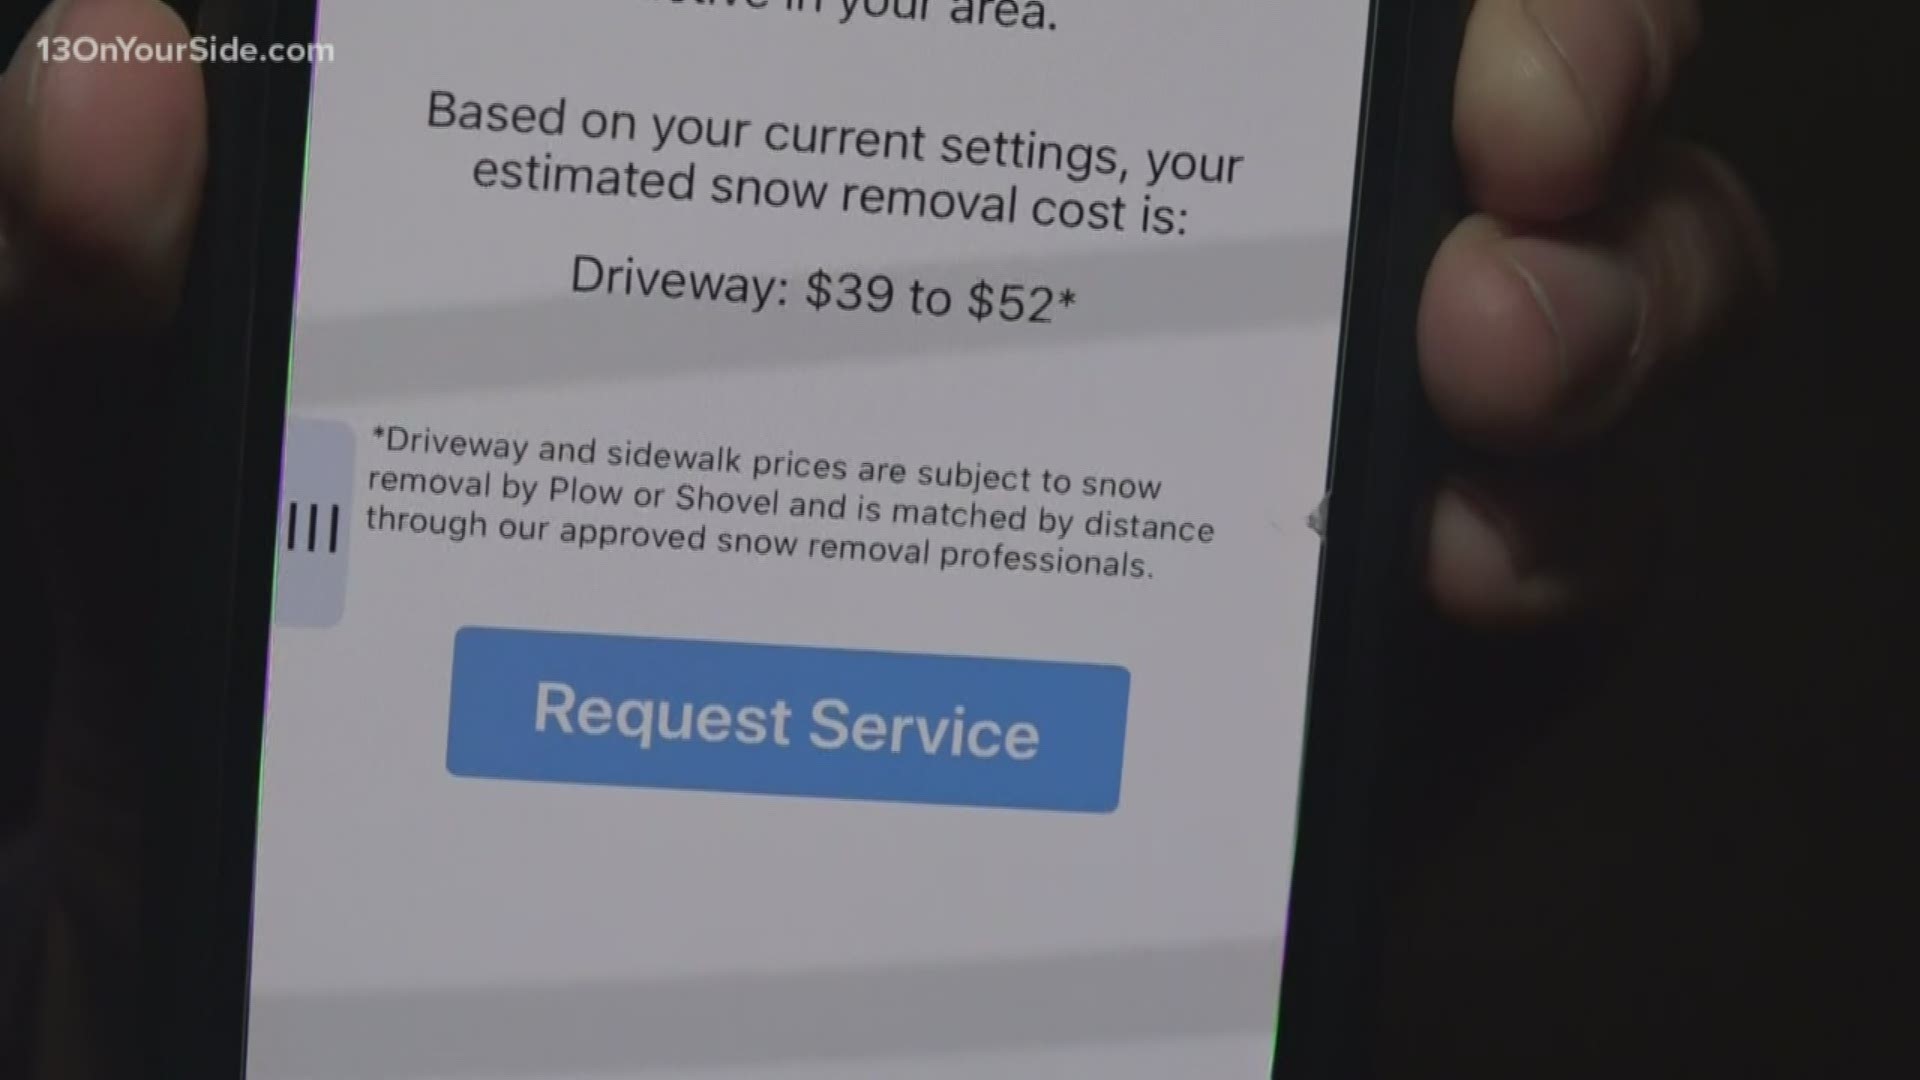 The app allows you to find service providers in your area to shovel, snow blow or plow your driveways and sidewalks.